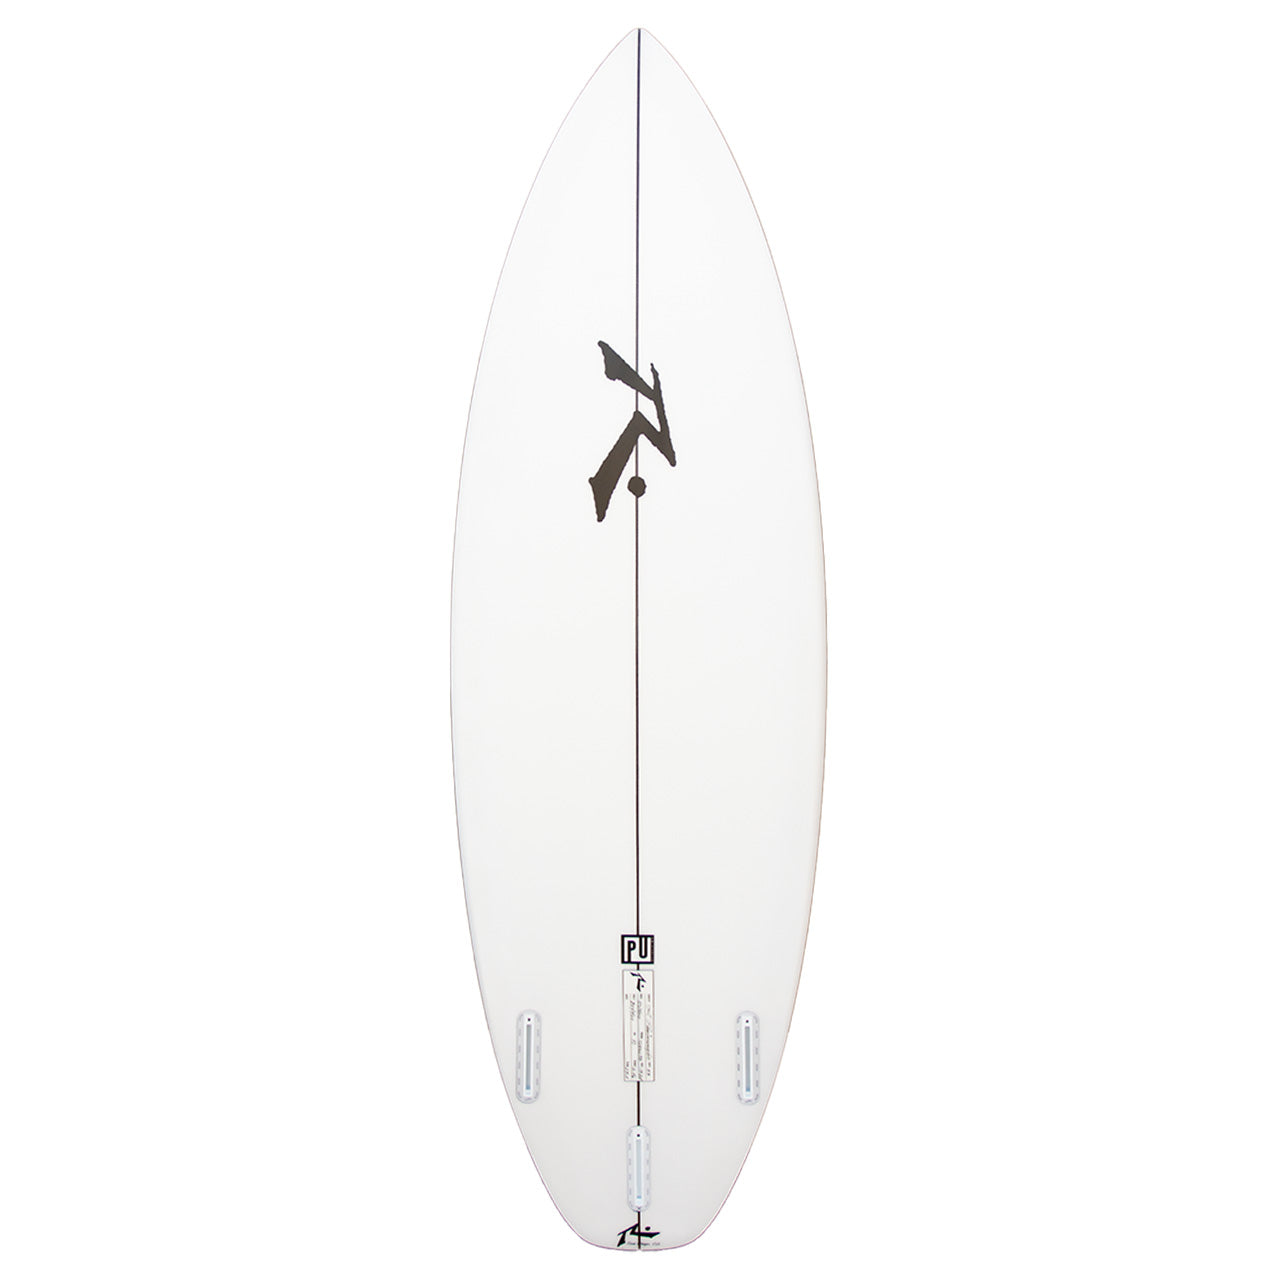 SD - High Performance Shortboard - Rusty Surfboards - Top View